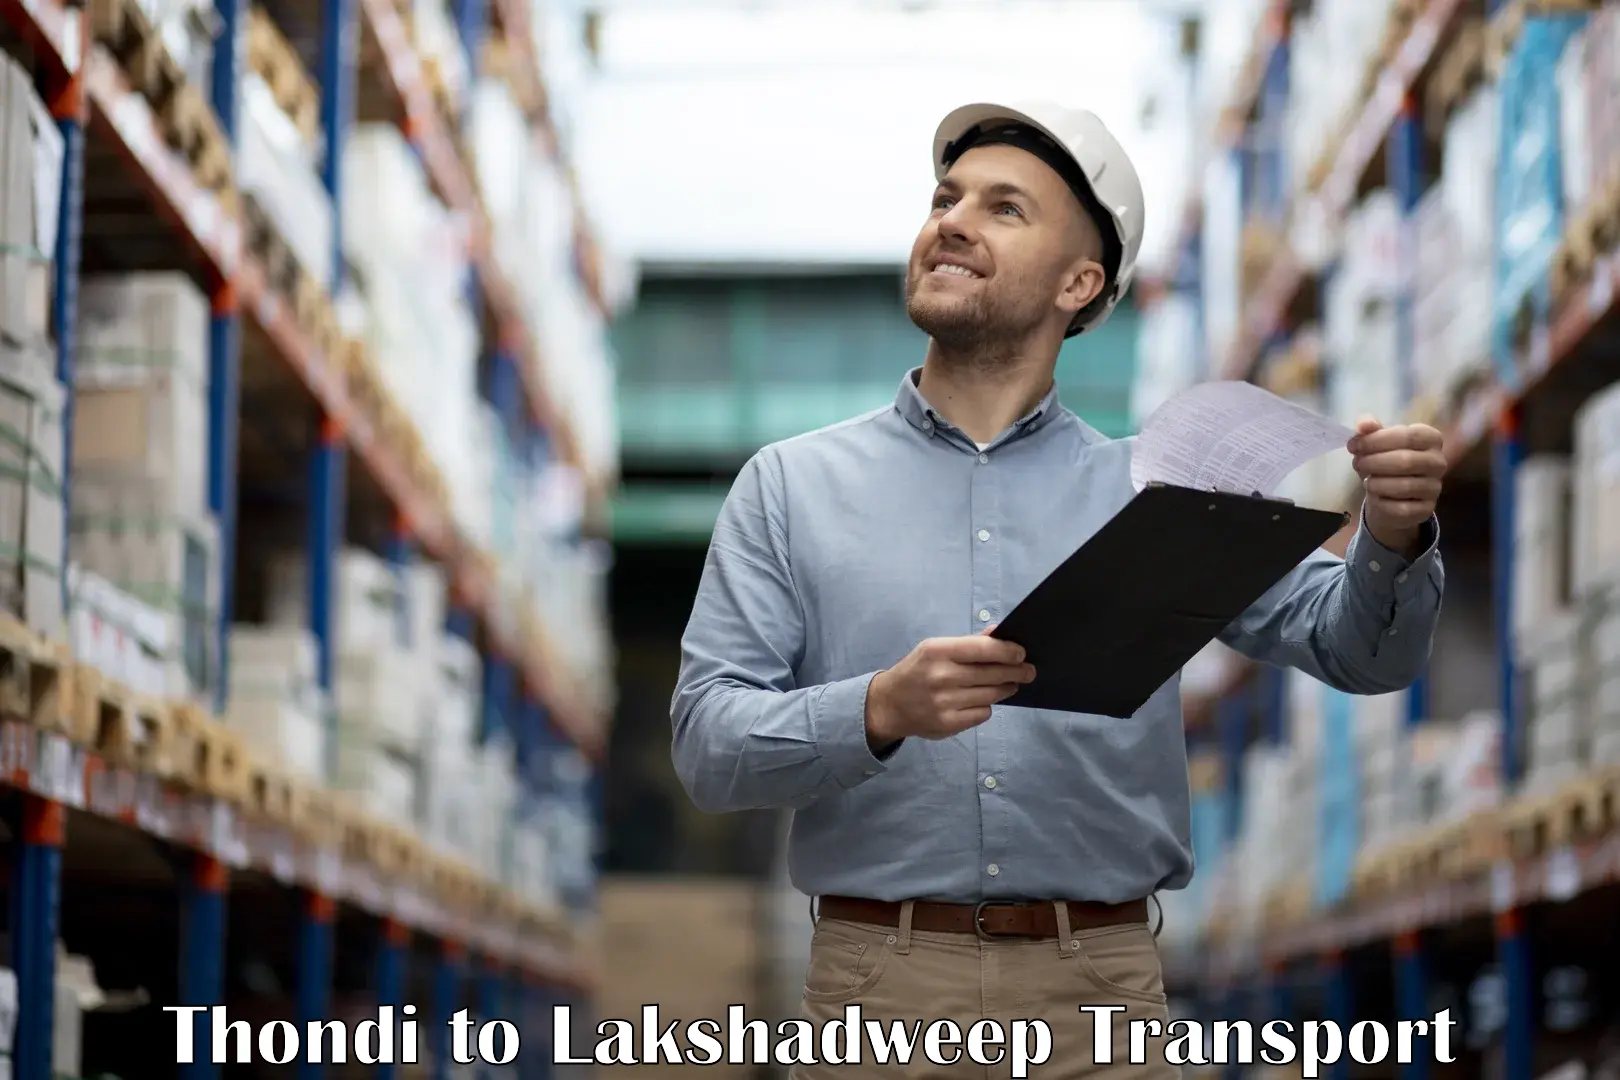 Container transportation services Thondi to Lakshadweep